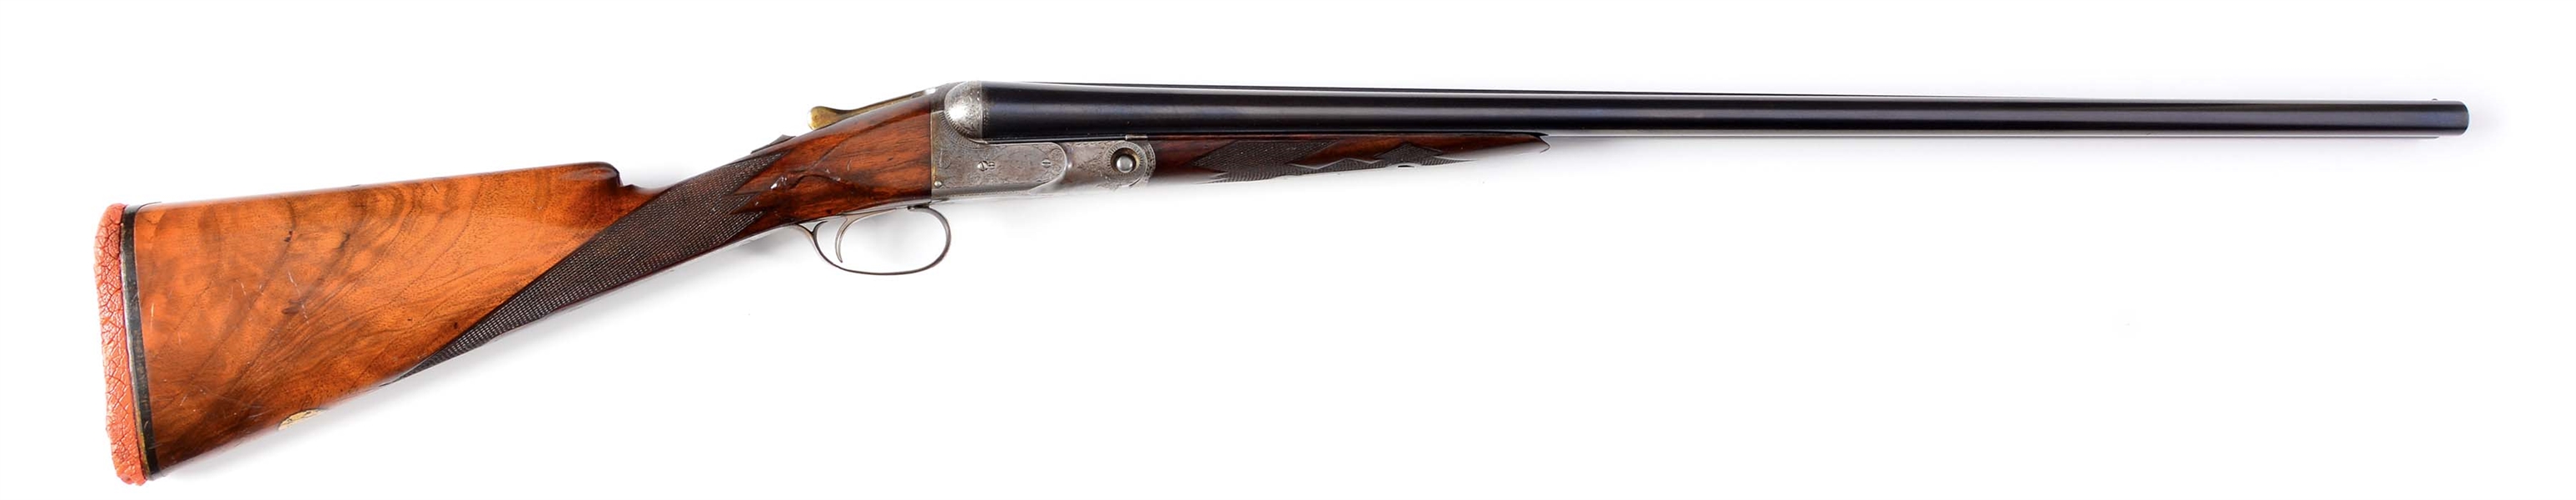 (C) 32" BARRELED PARKER DH GRADE TRAP OR PIGEON GUN WITH STRAIGHT GRIP AND SINGLE TRIGGER (1900).